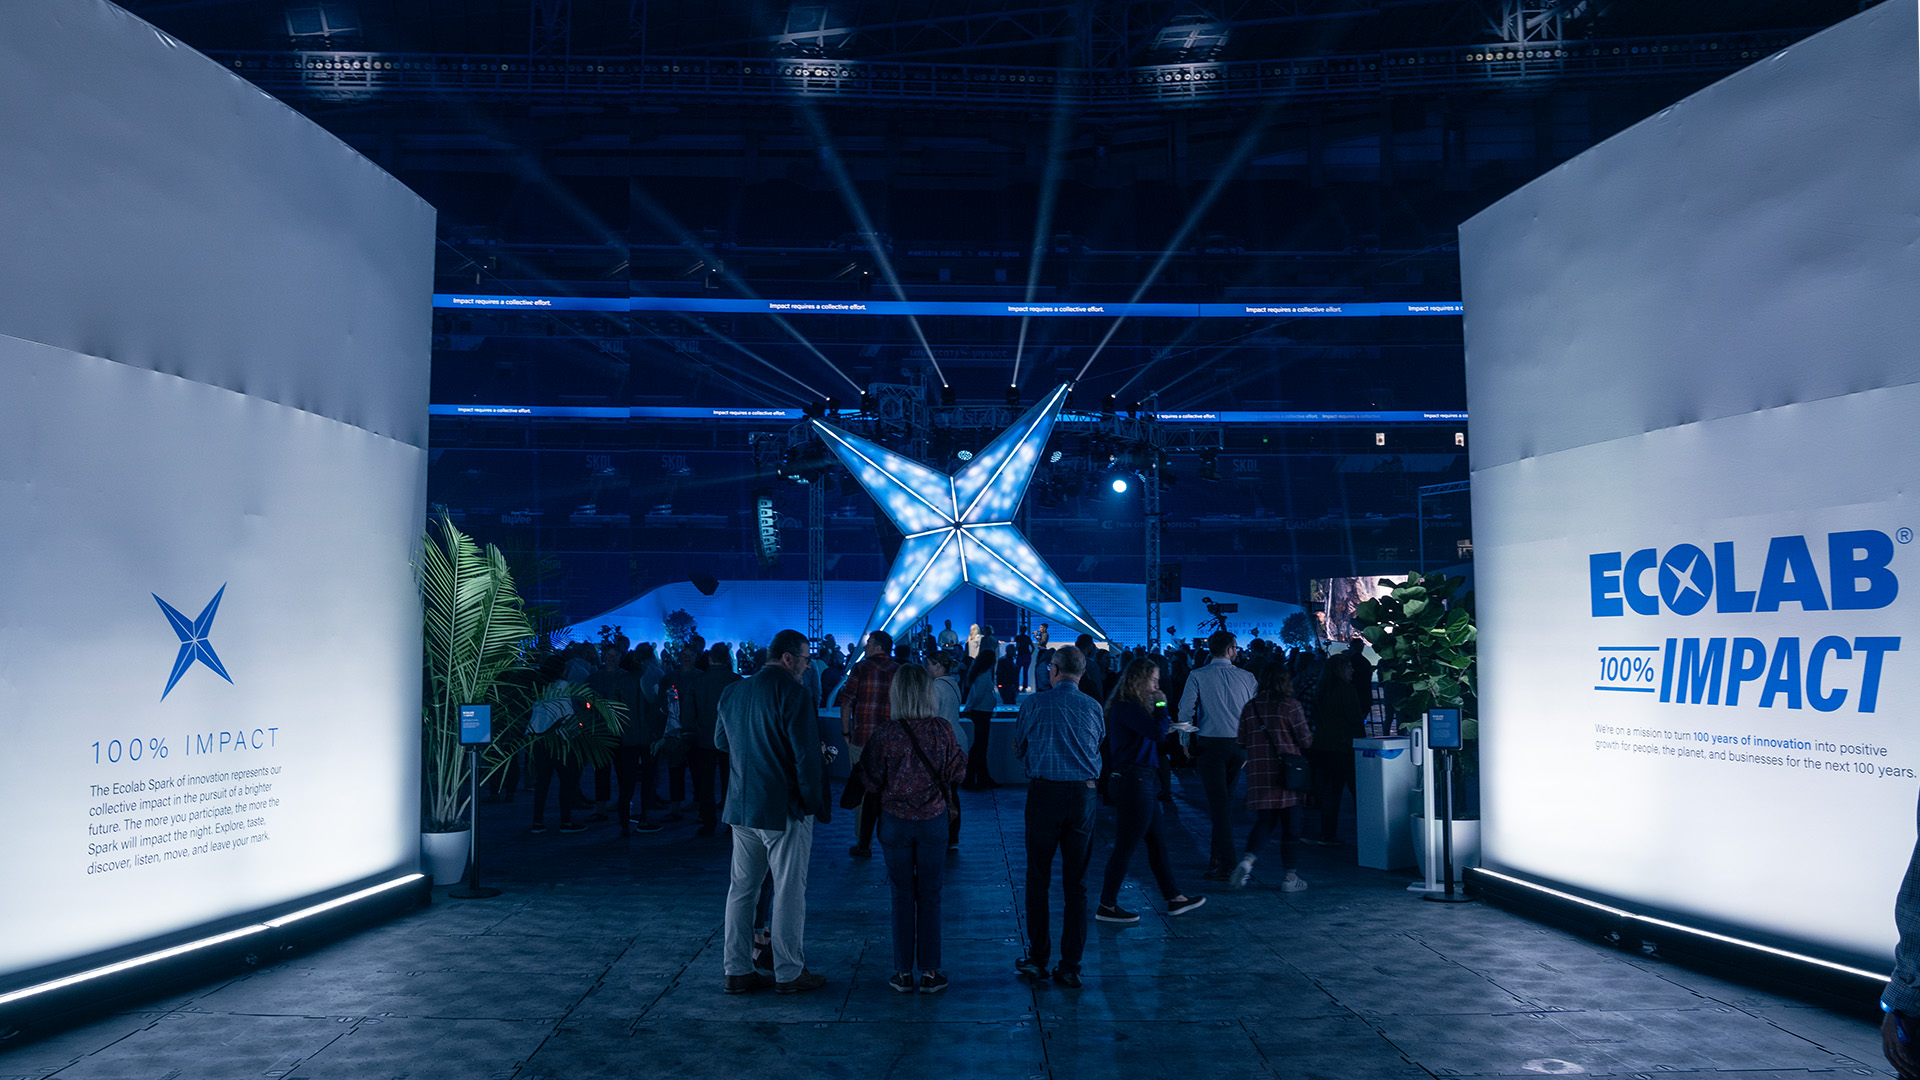 A photo captures the entrance during Ecolab's 100th anniversary, featuring 'The Spark' digital sculpture at its heart. Surrounding it, attendees form a semicircle, with some admiring the sculpture while others engage in conversation, smiles brightening the scene.